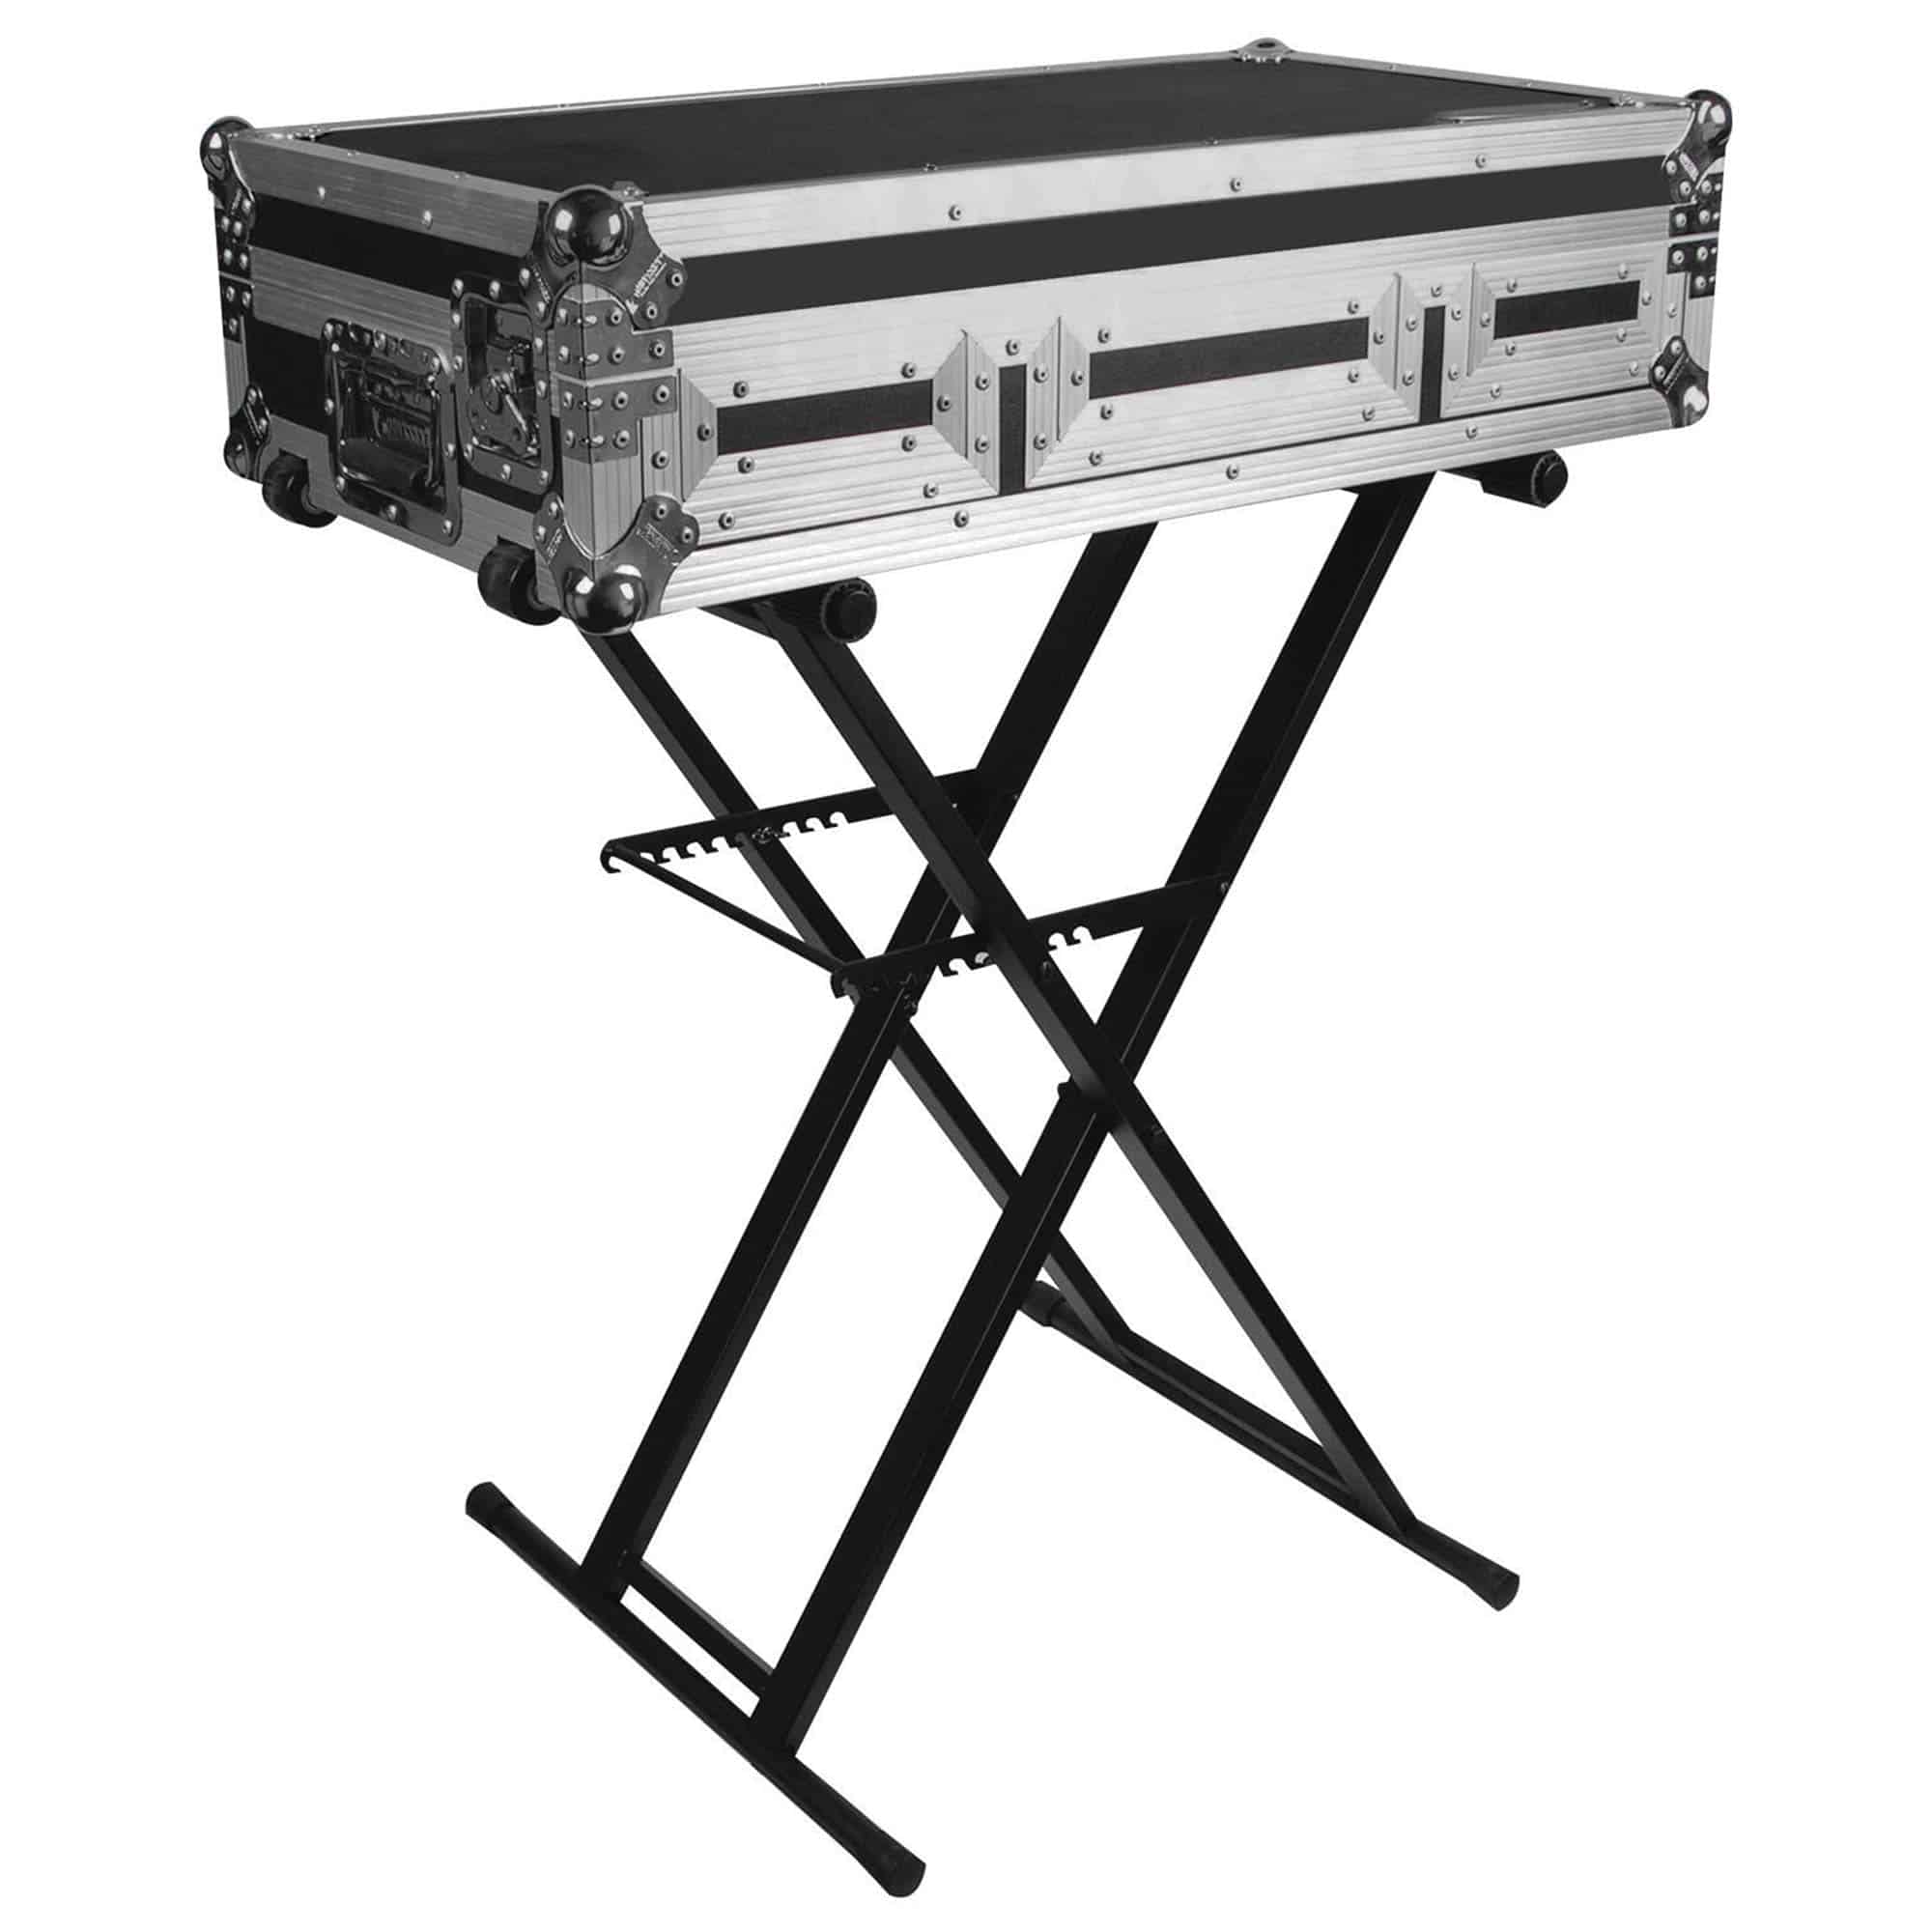 Odyssey LTBXS, Heavy-Duty X-Stand for DJ Coffins and Controller Cases - Black - Hollywood DJ